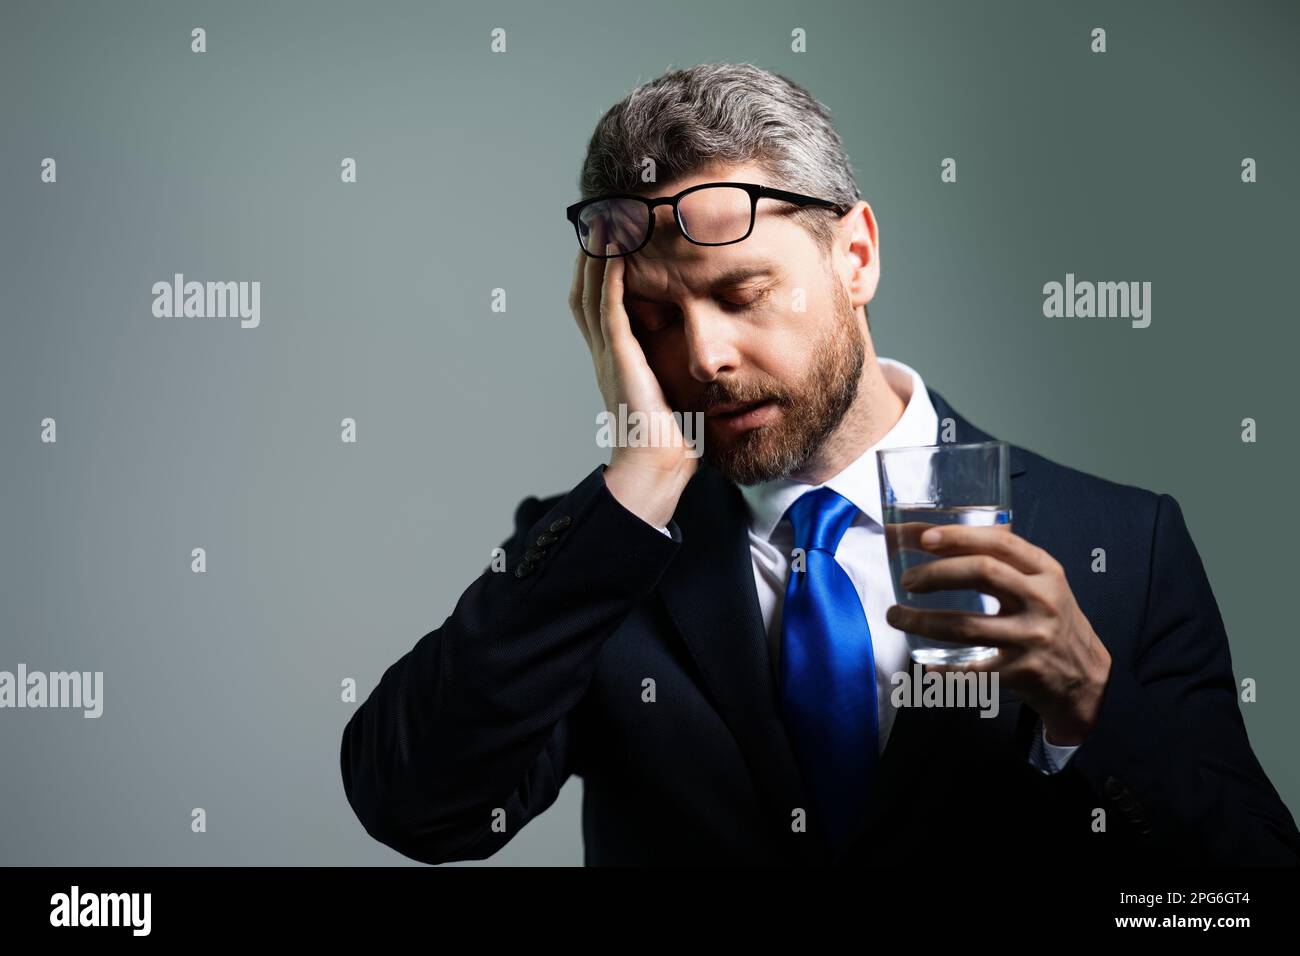 Tired man having a terrible headache. Exhausted man feeling unhealthy, upset about headache illness. Stressed middle-aged man with headache isolated o Stock Photo